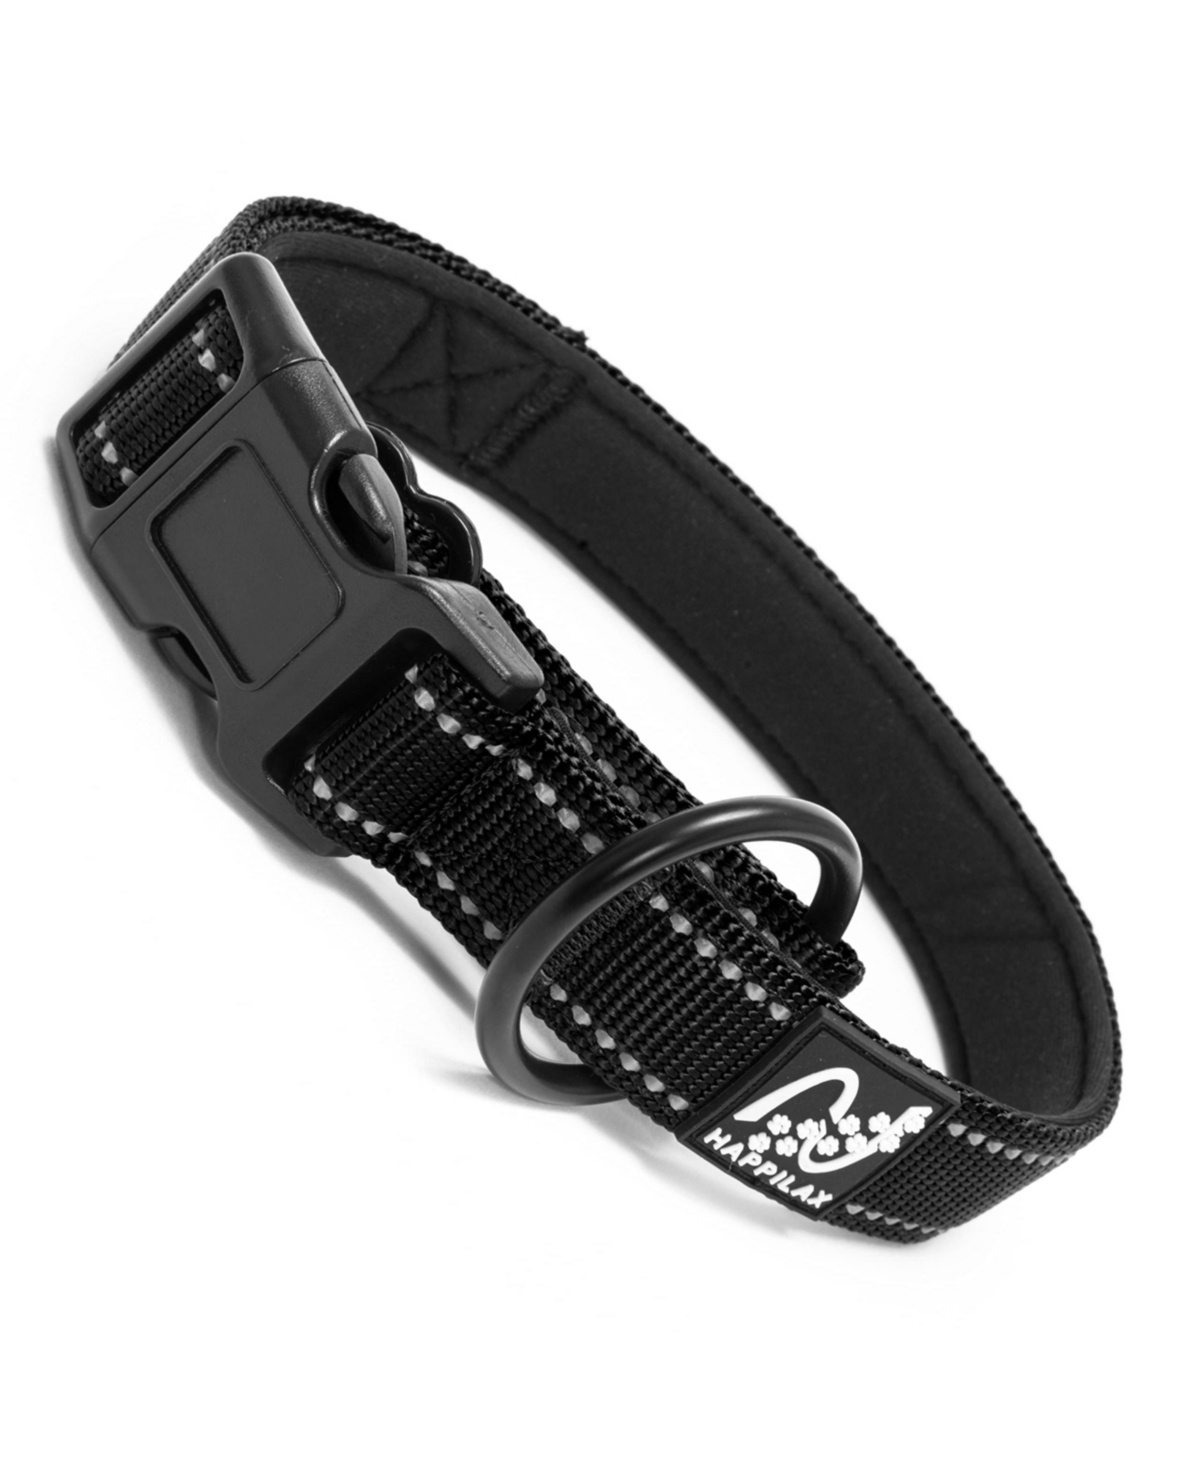 Reflective Padded Adjustable Dog Collar with Strain Relief for Dogs - Black